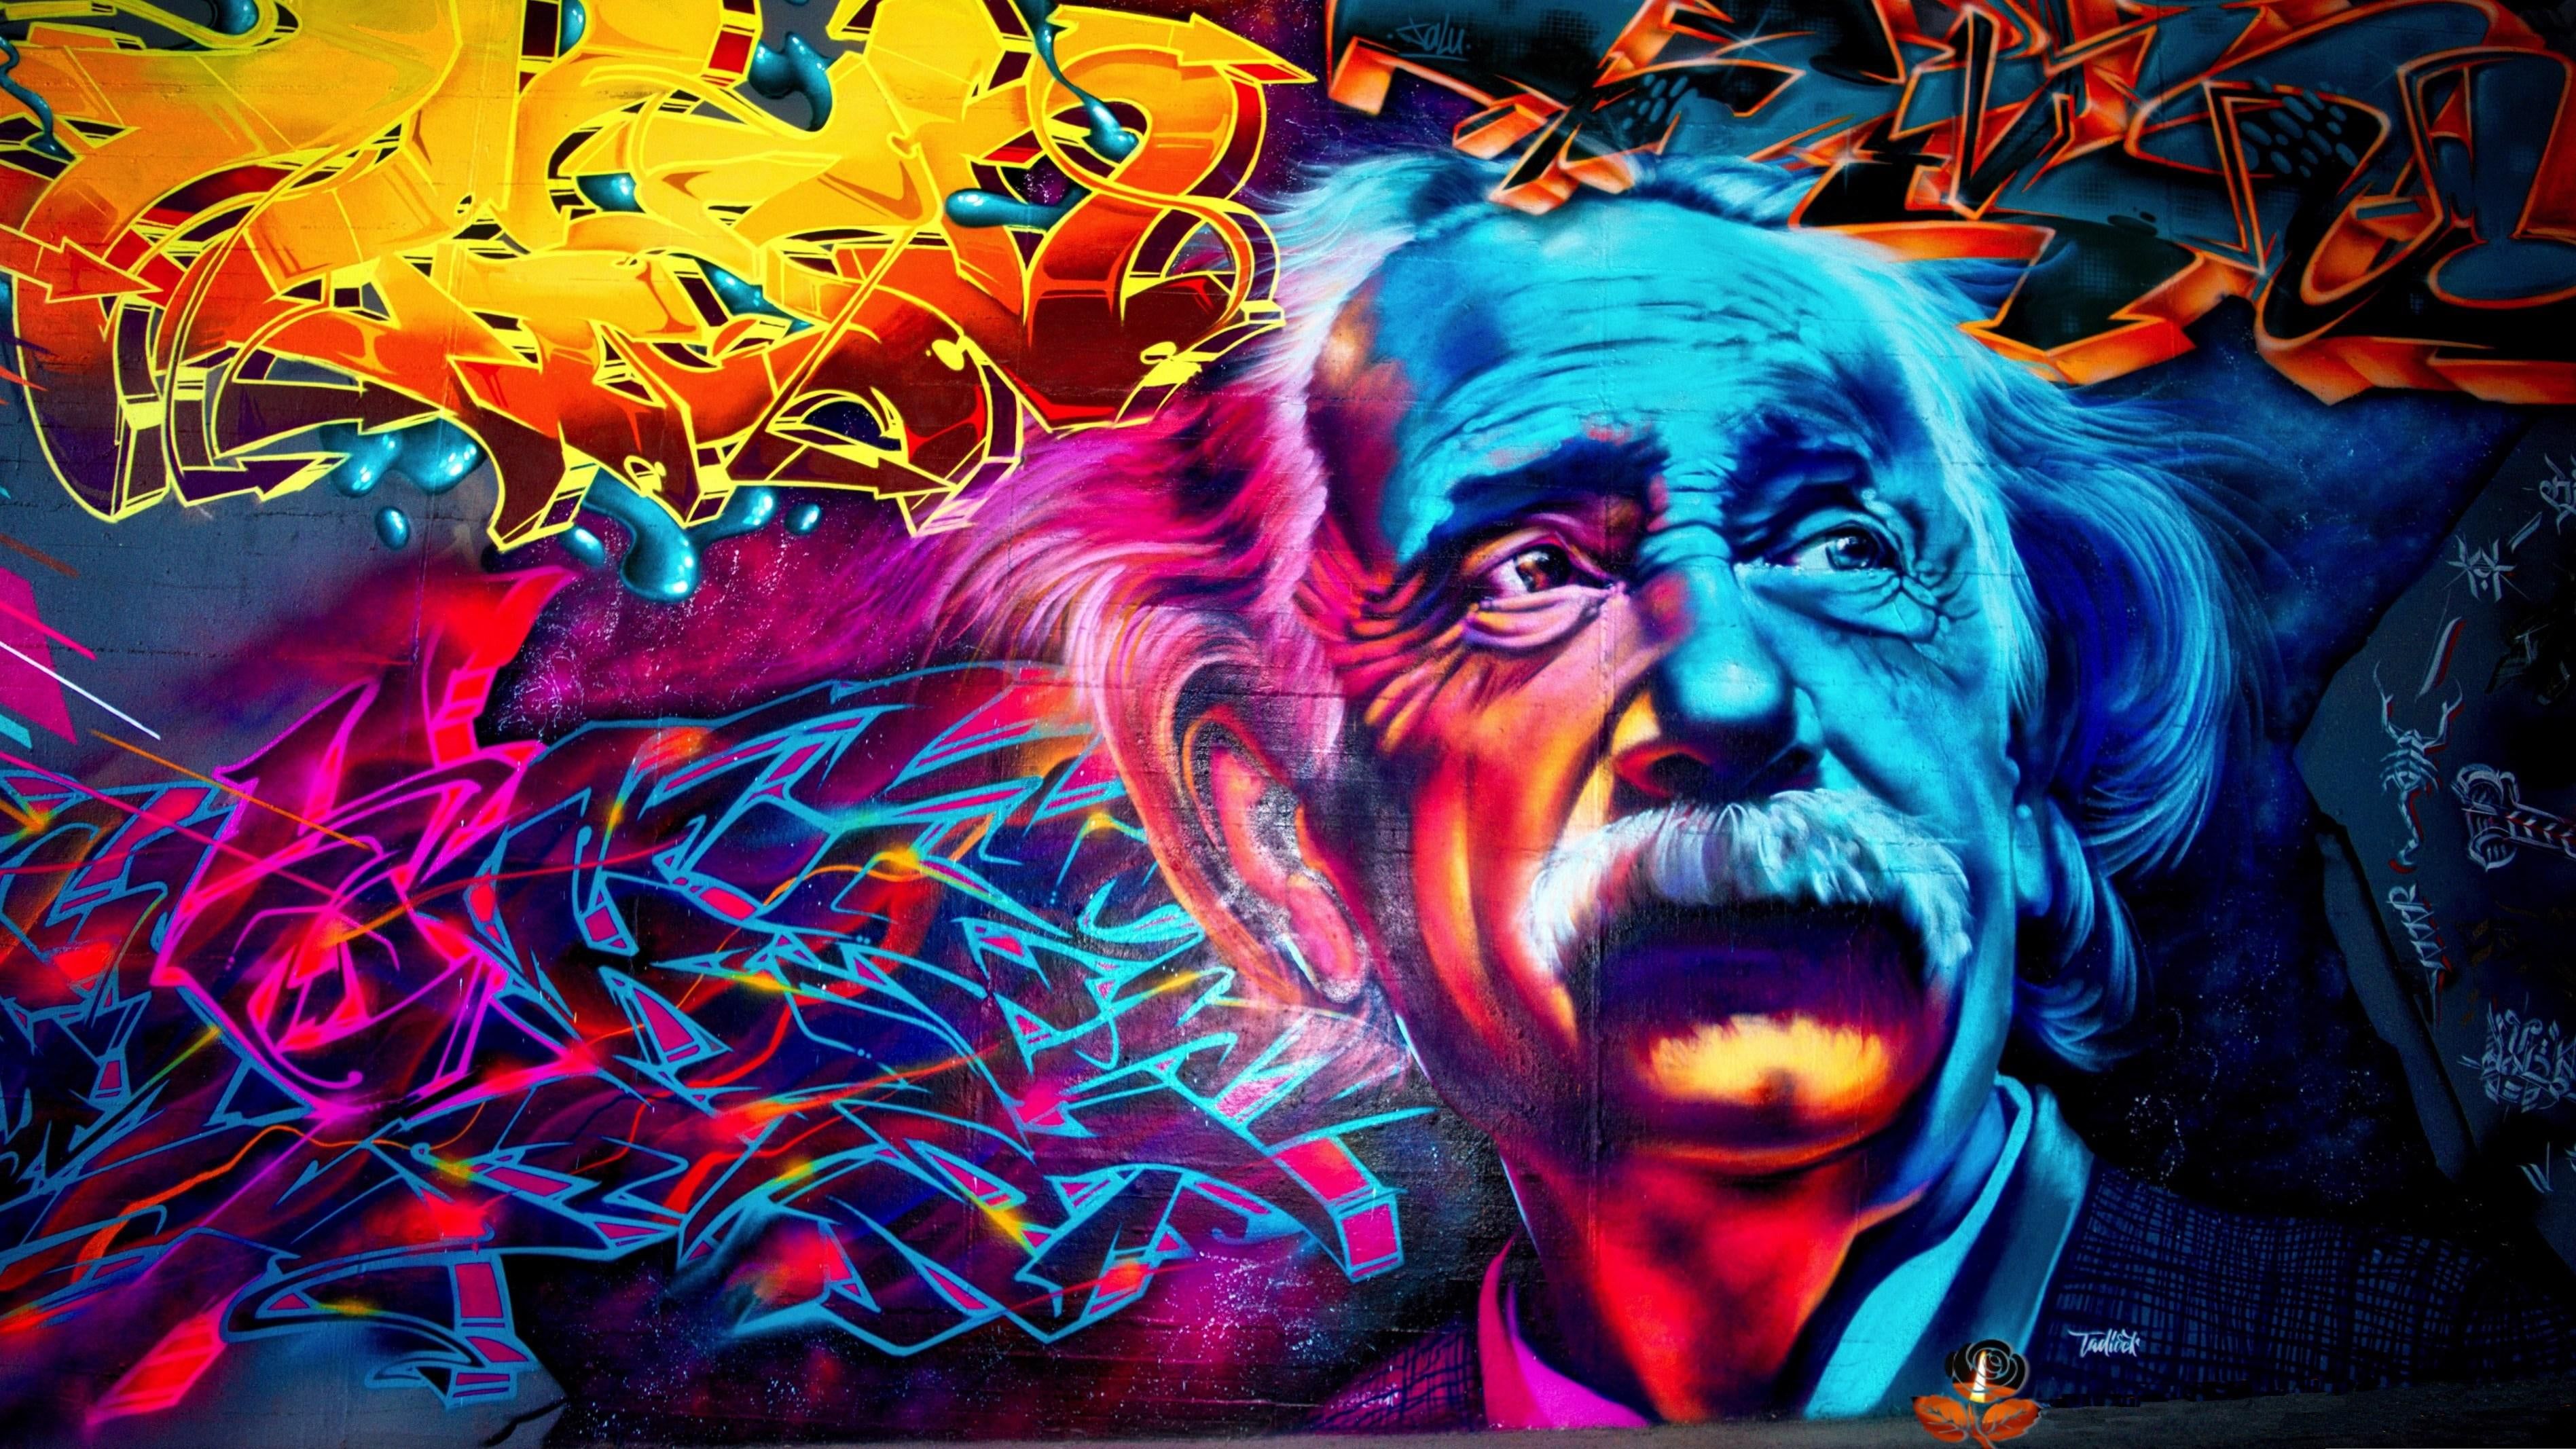 Graffiti 4K wallpaper for your desktop or mobile screen free and easy to download